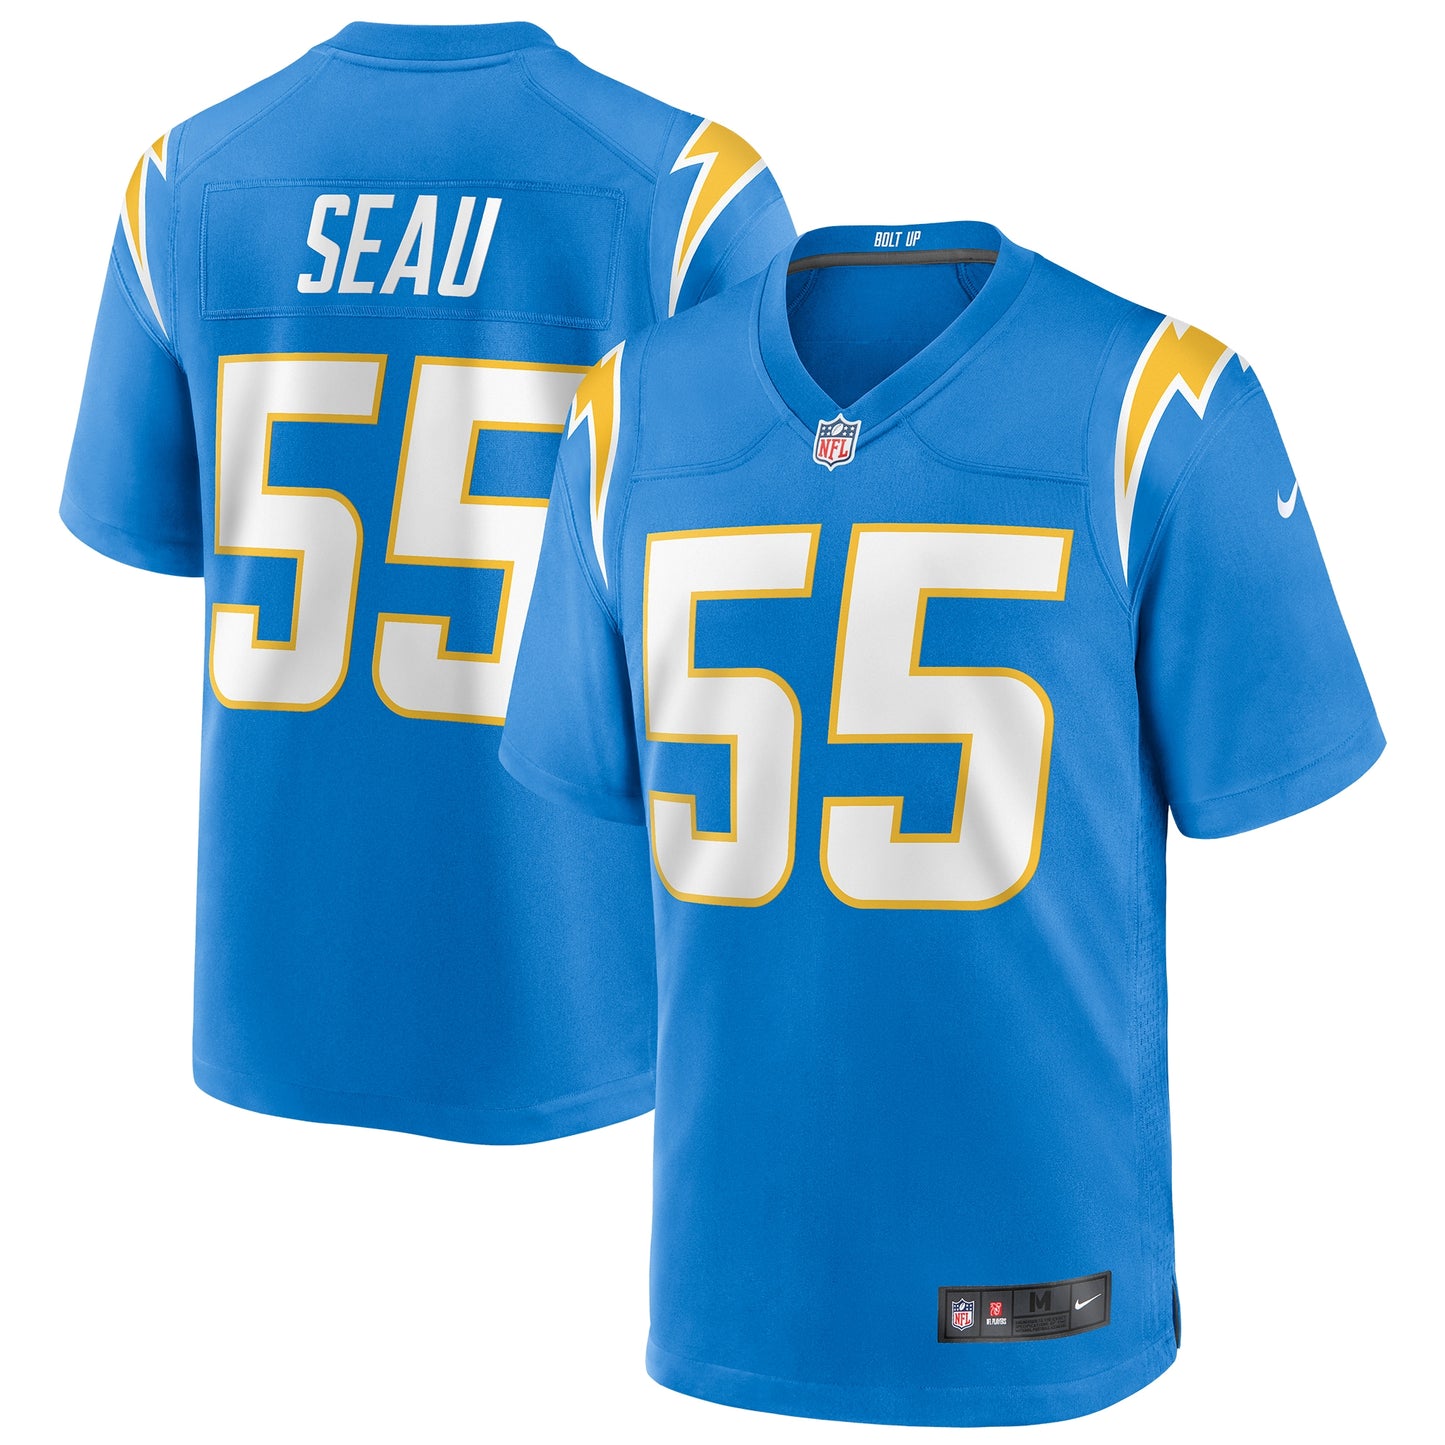 Junior Seau Los Angeles Chargers Nike Game Retired Player Jersey - Powder Blue